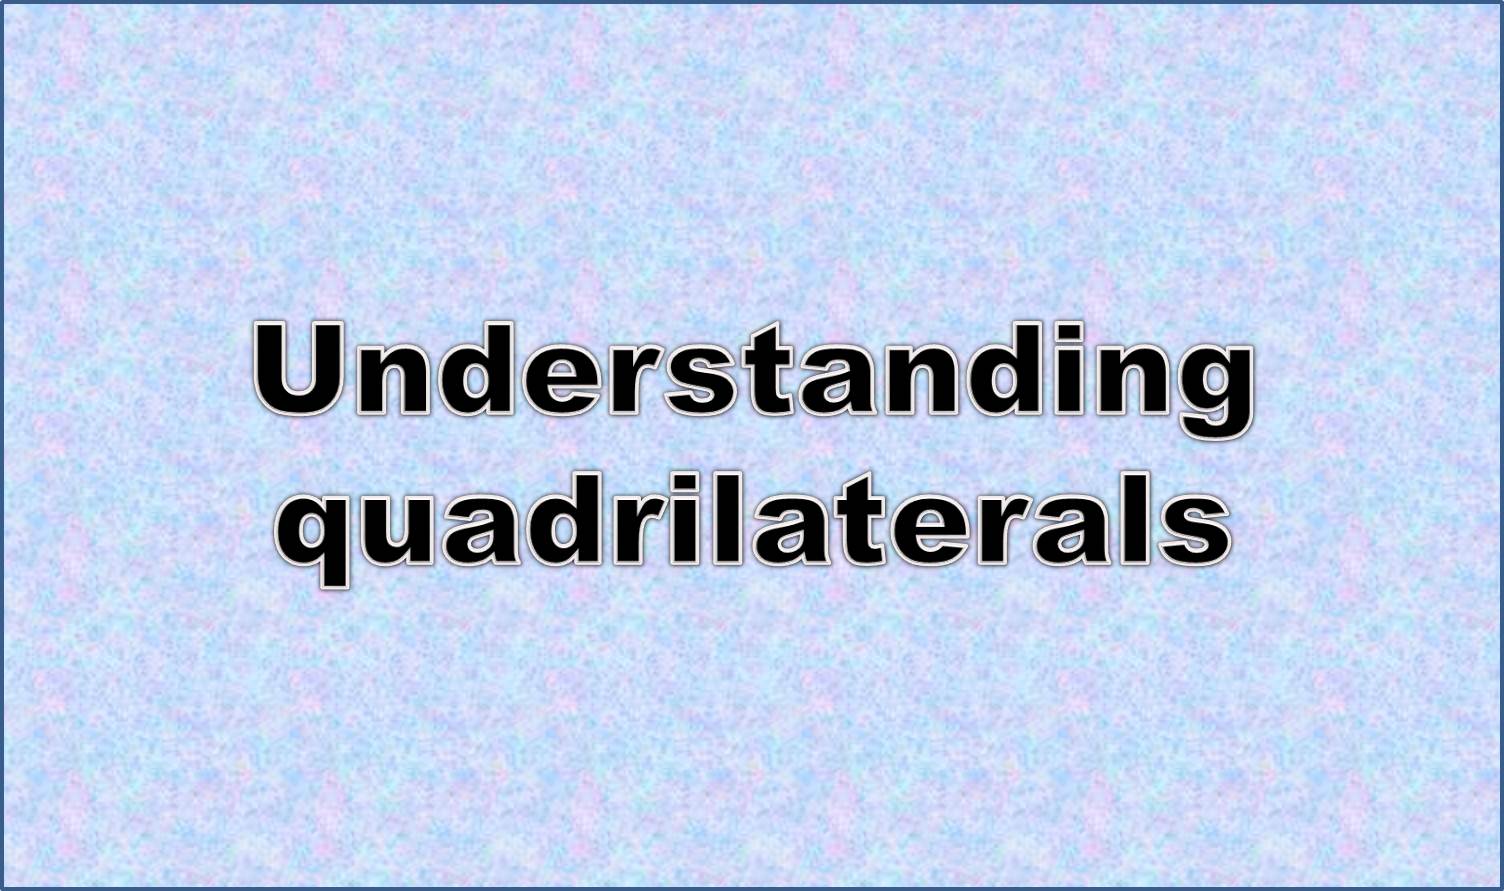 http://study.aisectonline.com/images/Classifying quadrilaterals.jpg